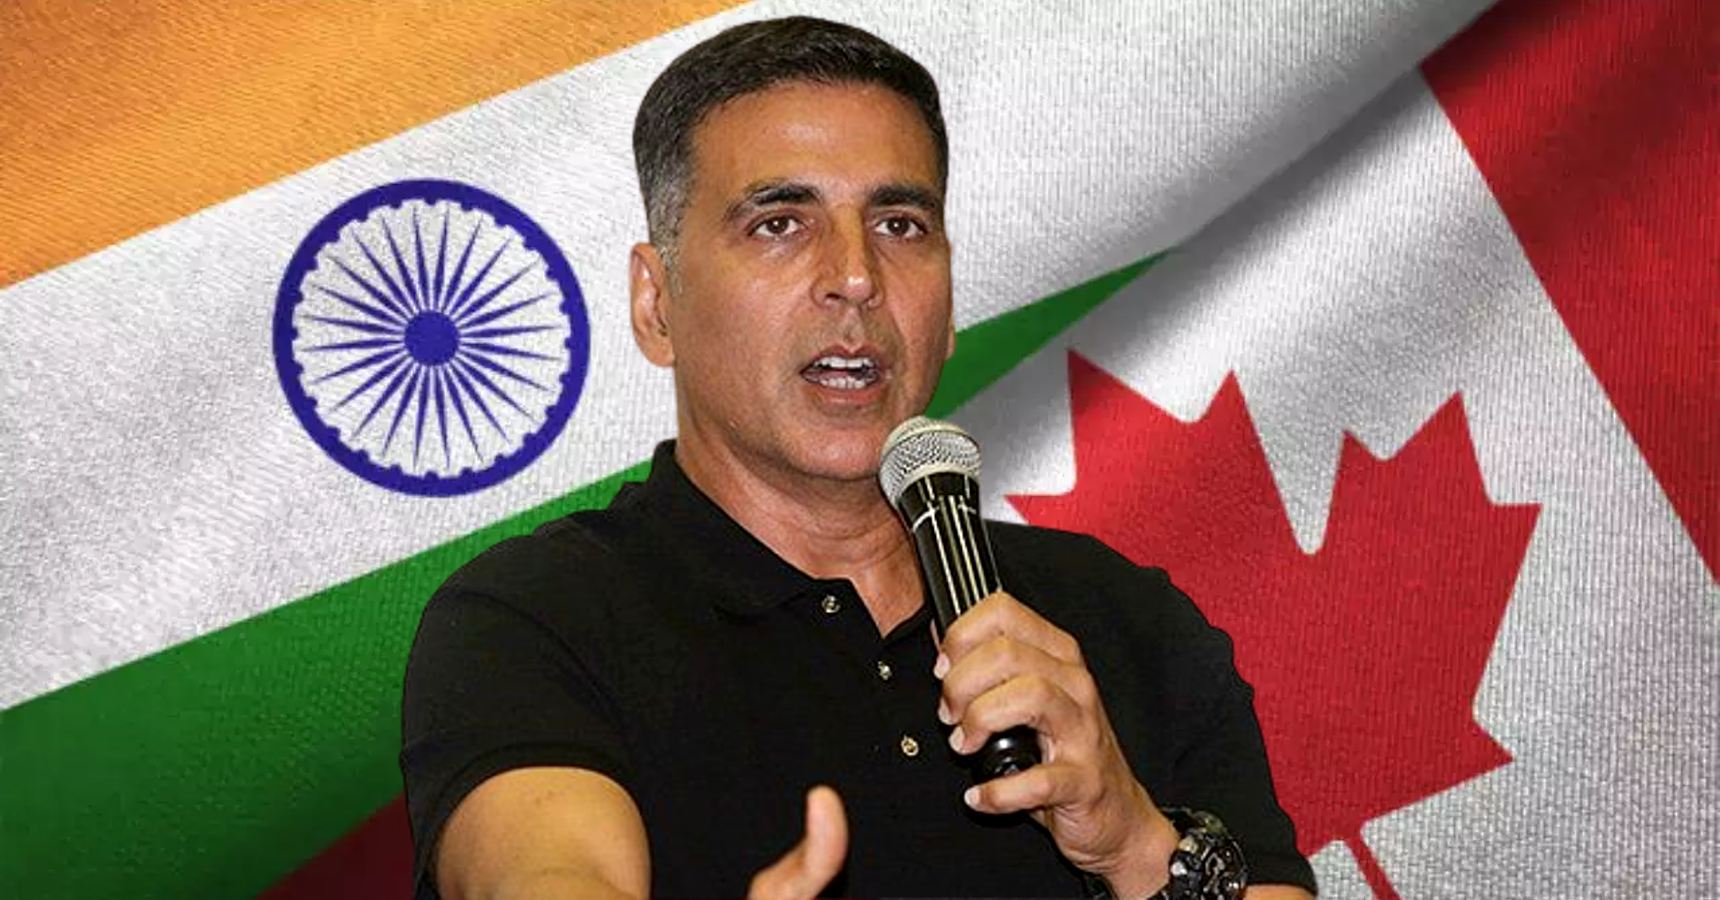 Akshay Kumar opens up on Citizenship Controversy saying India is everything to me